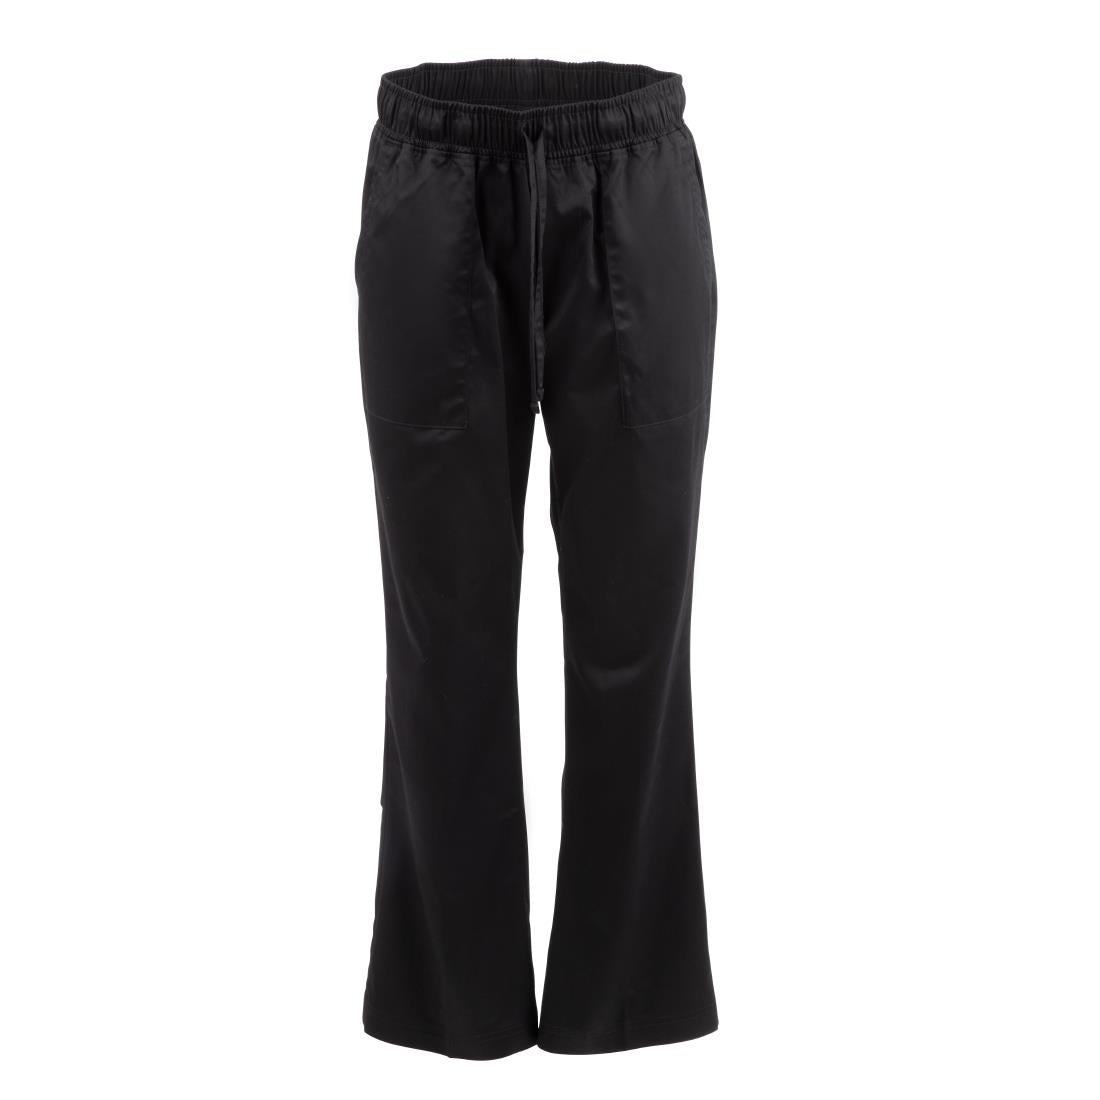 A431-M Chef Works Womens Executive Chef Trousers Black M